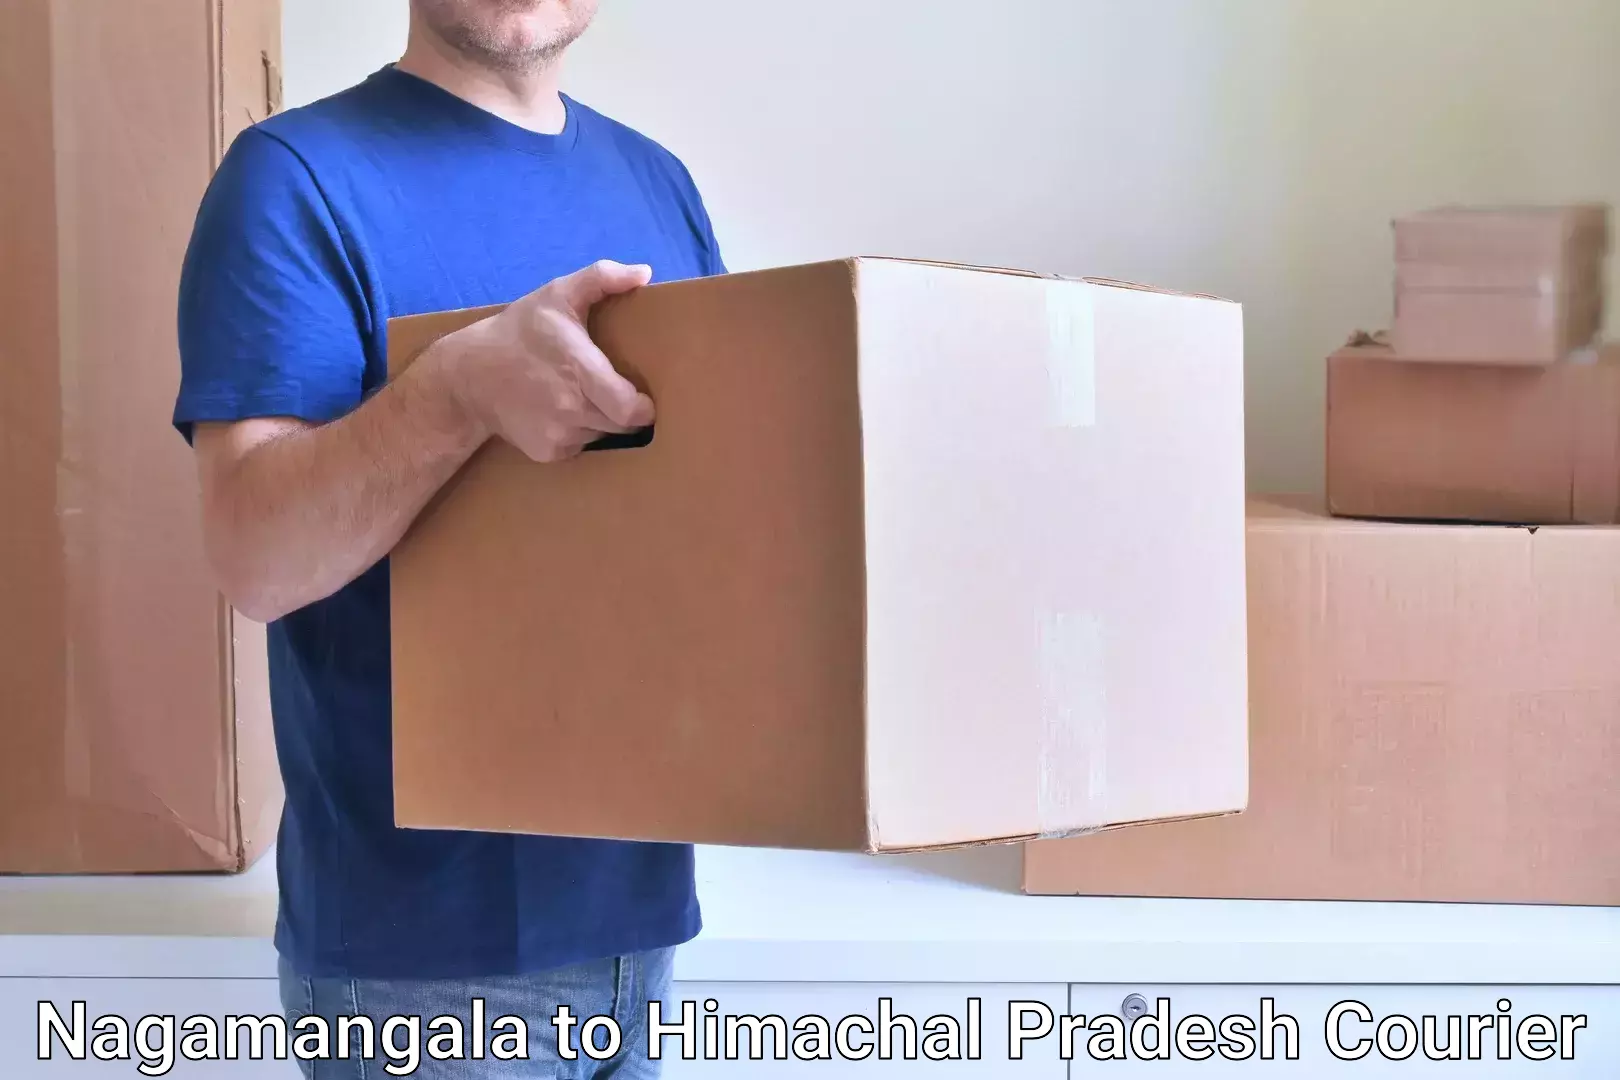 Professional courier handling Nagamangala to Solan